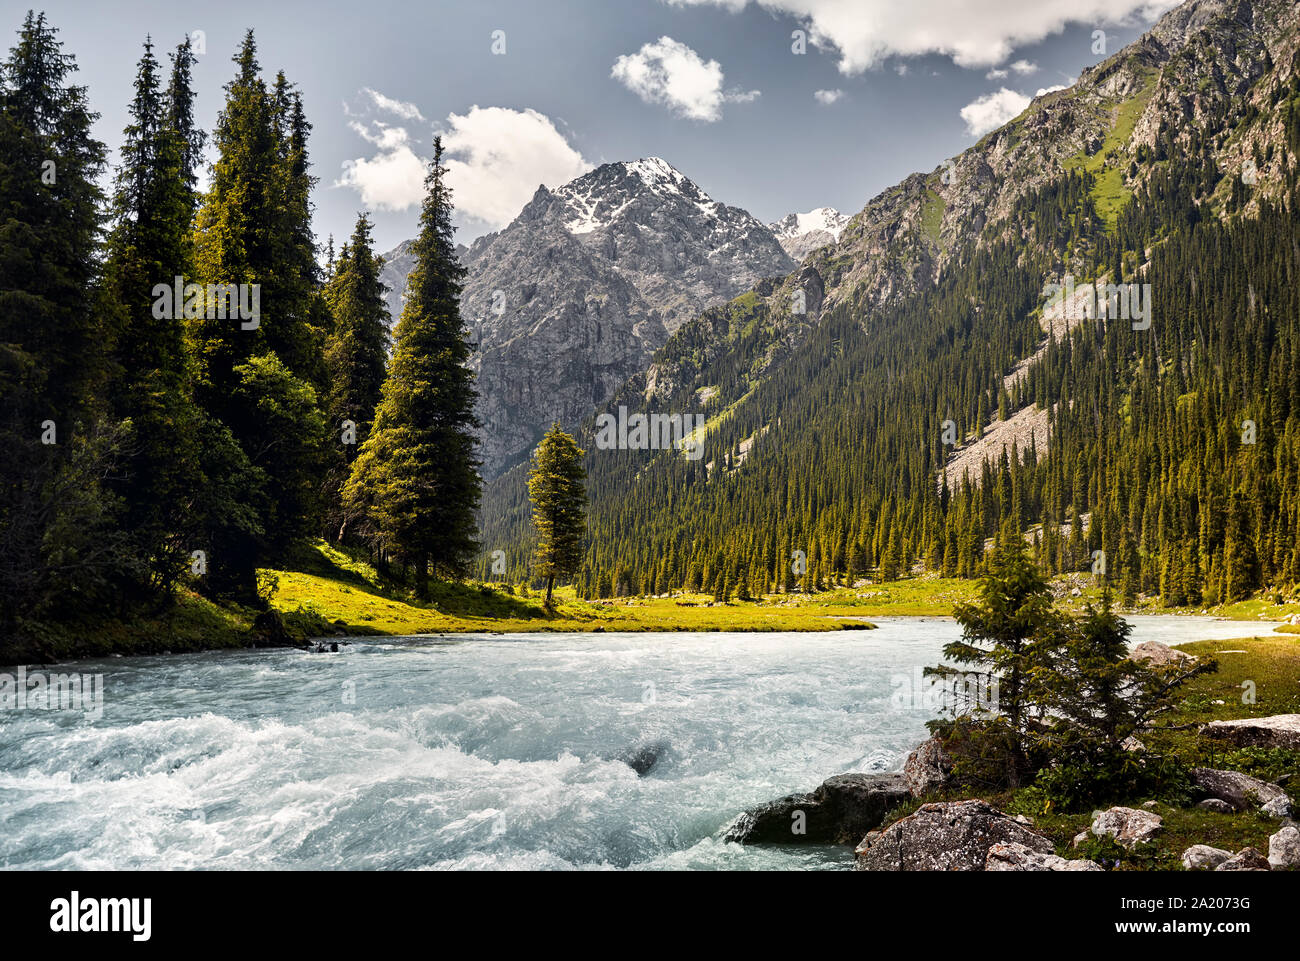 Karakol river in the mountain valley with big pine trees and snowy peak in Karakol national park, Kyrgyzstan Stock Photo